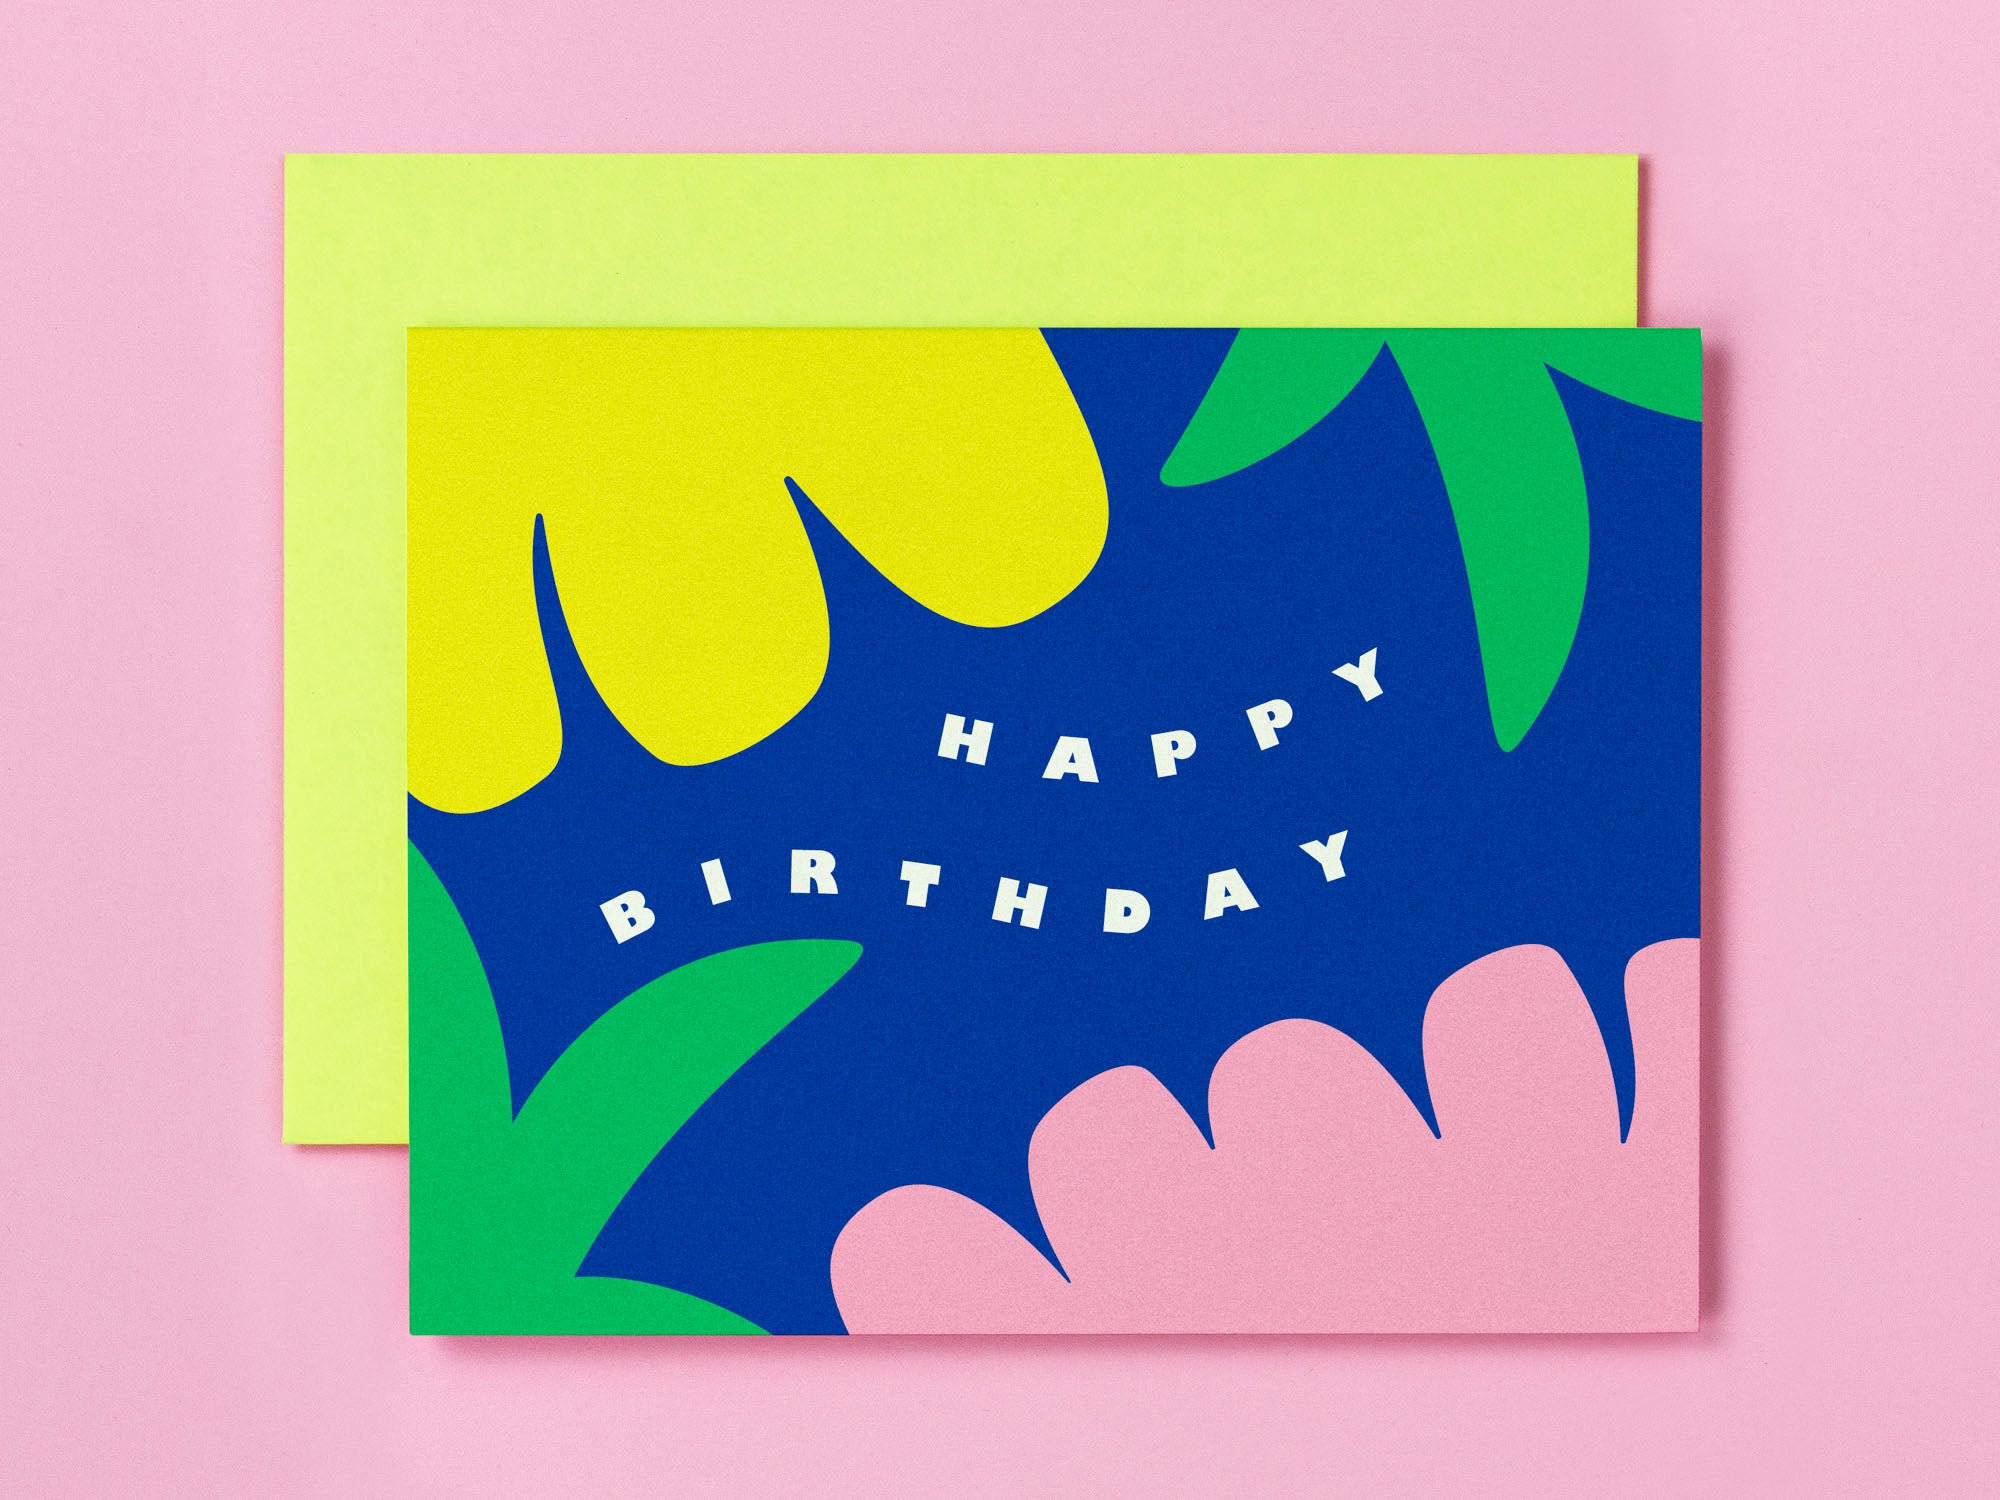 Tropical happy birthday card with abstract tropical floral illustration. Made in USA by My Darlin' @mydarlin_bk